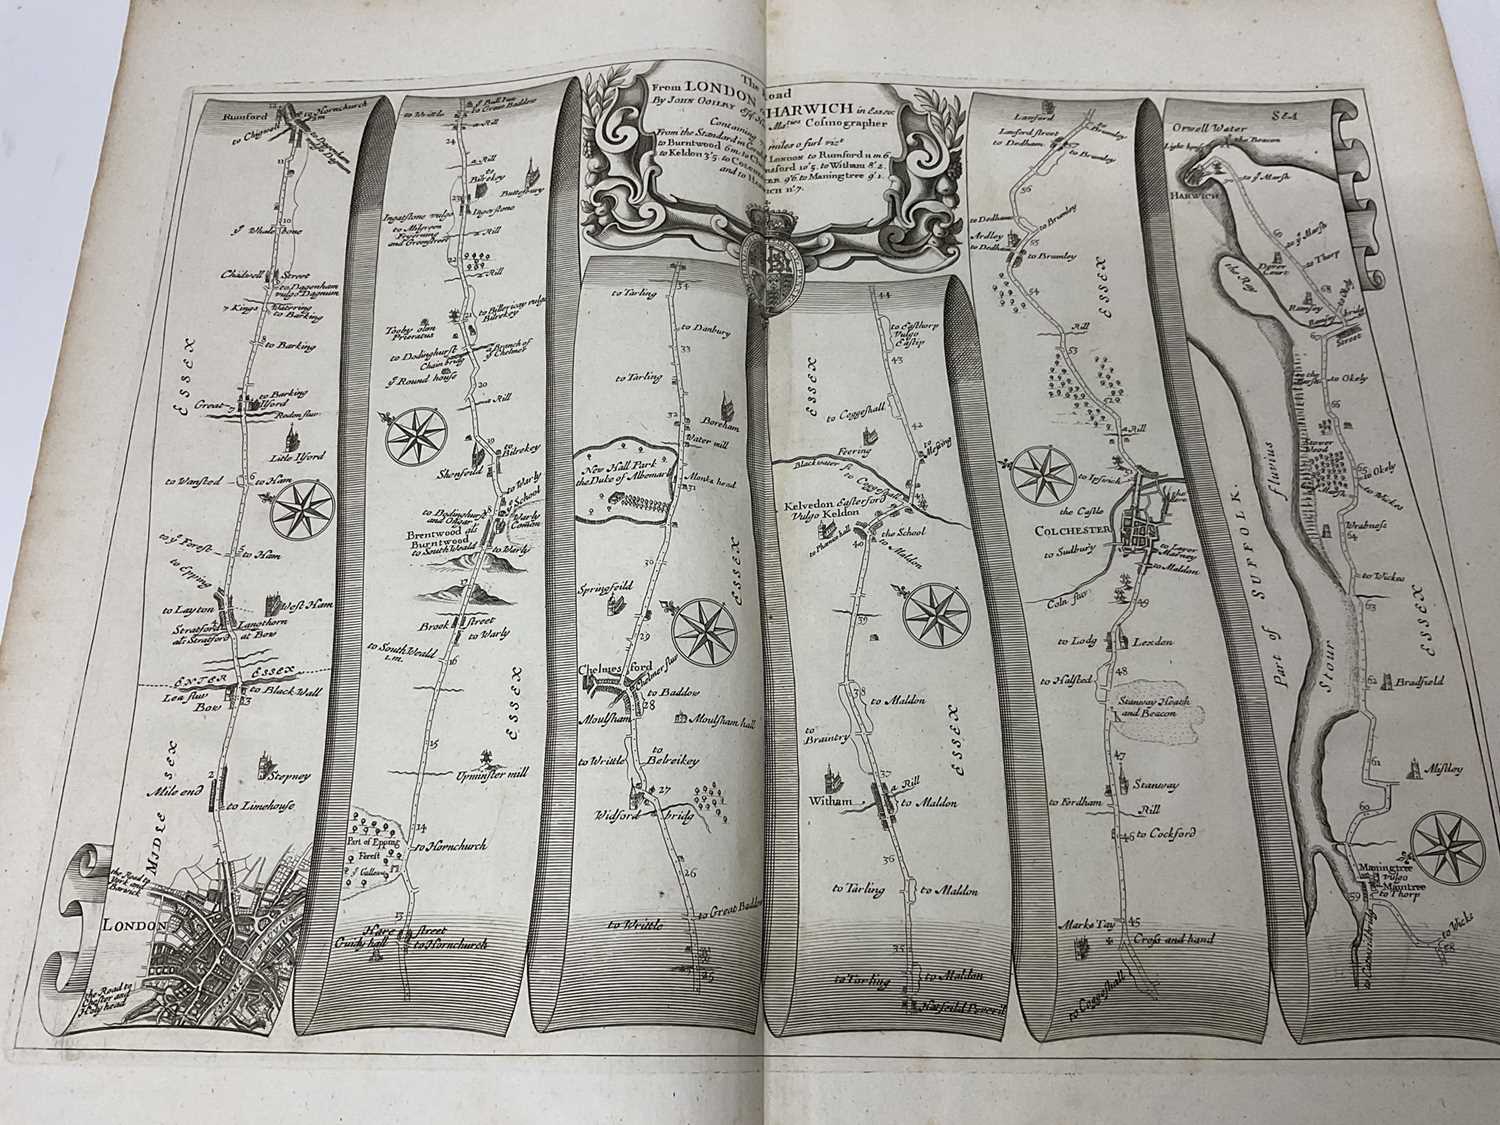 London to Harwich road map and other local interest maps and engravings